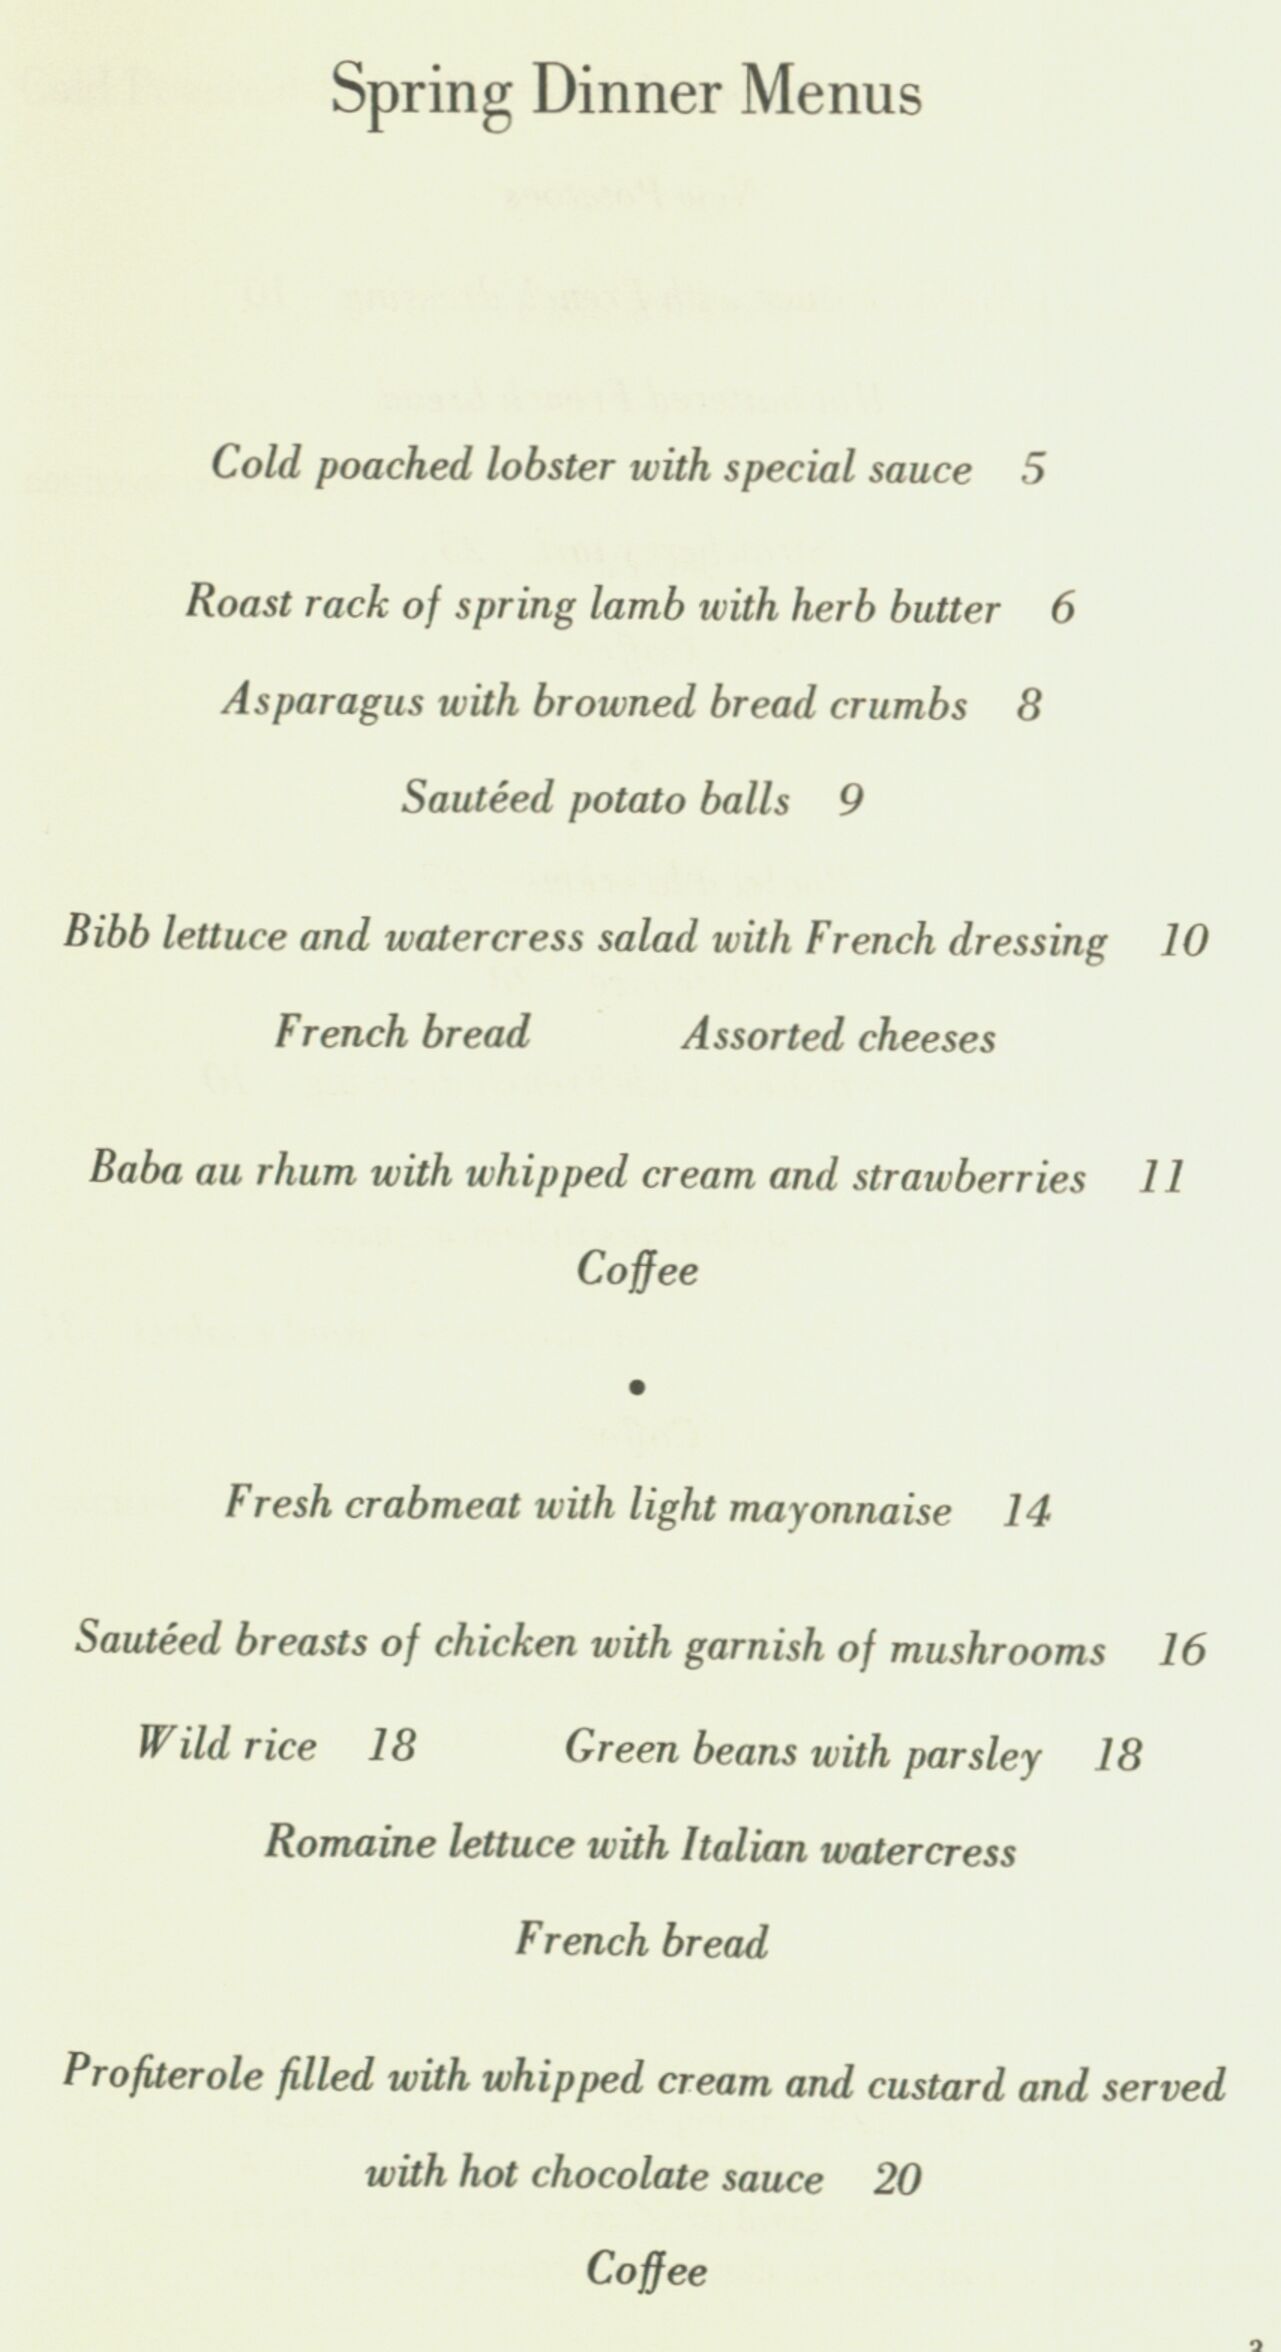 Spring menus from the Edna Lewis Cookbook courtesy of the Bentley Rare Book Museum